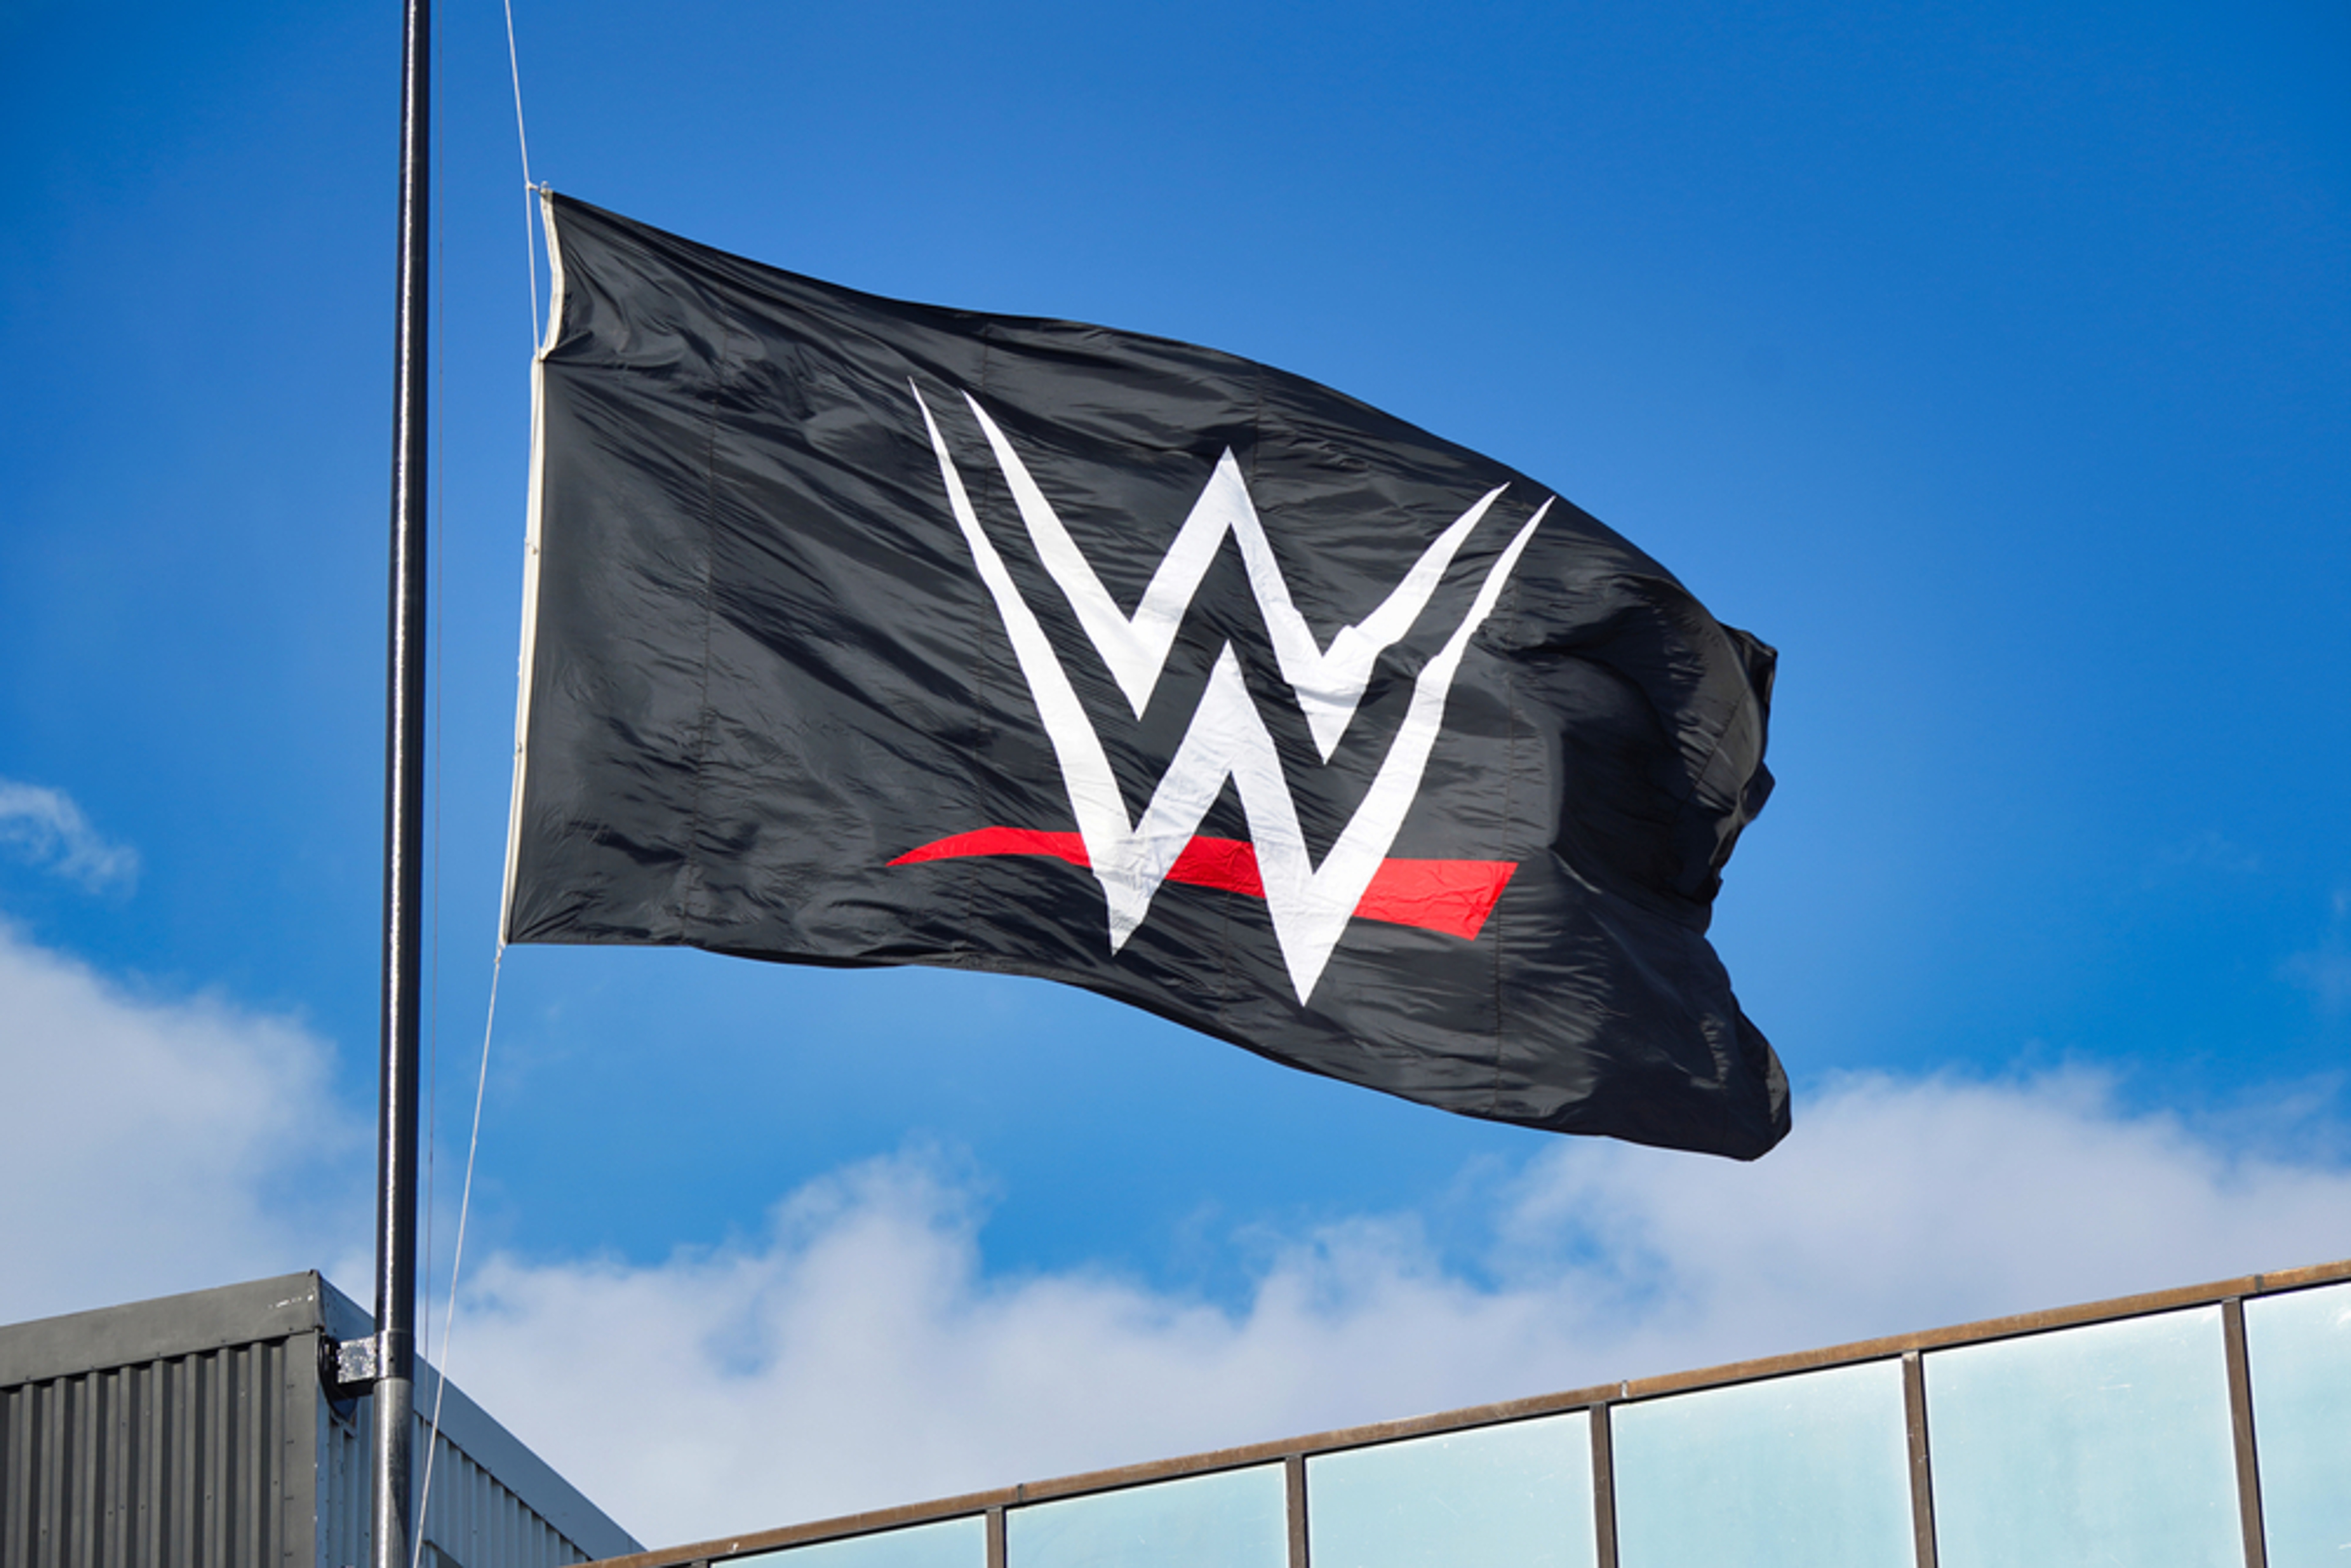 WWE Options Traders Bet On Stock Rallying By This Much By July Expiration